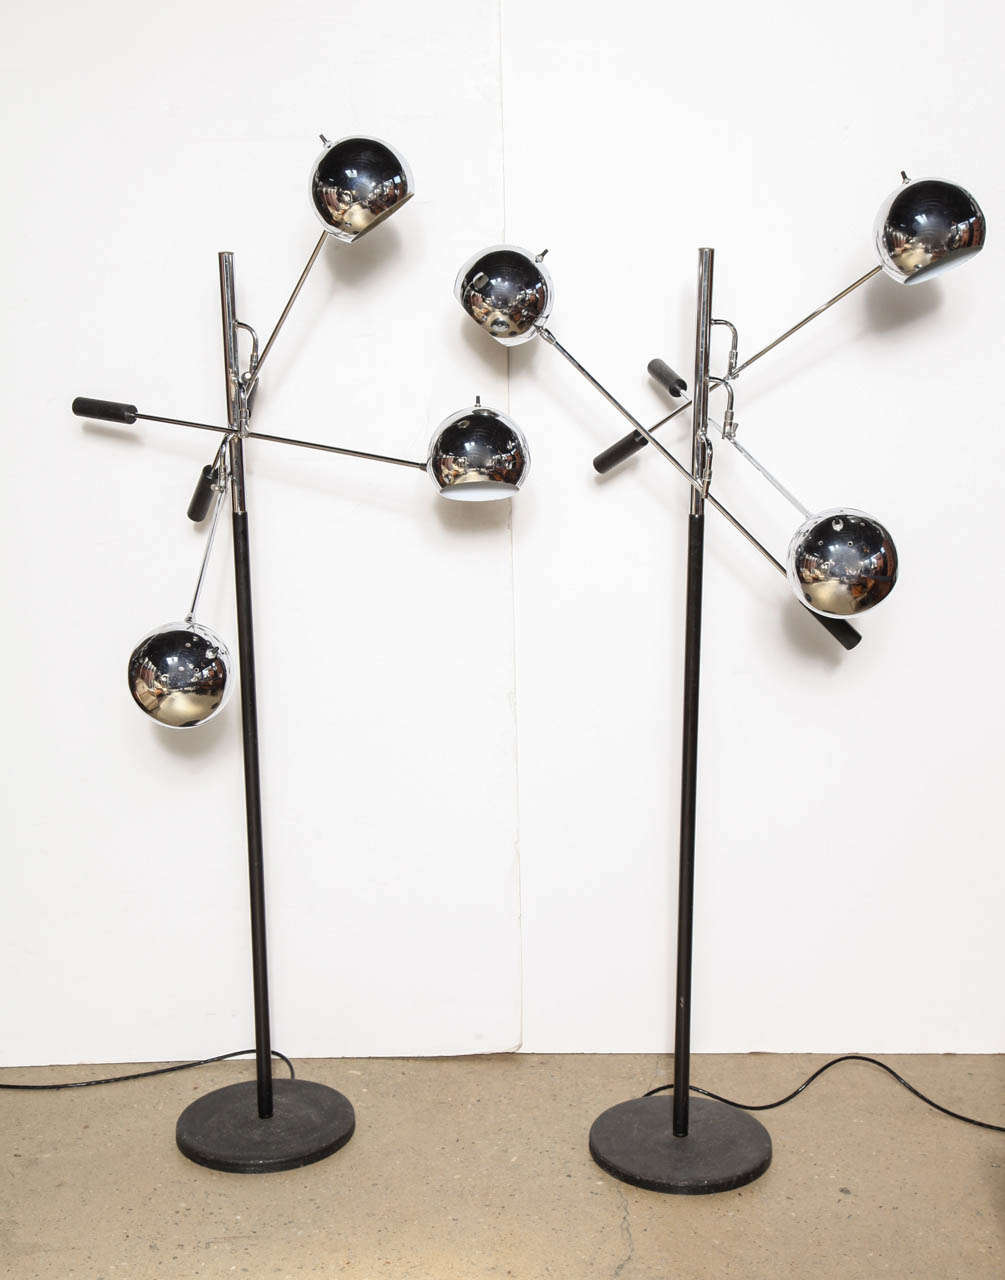 2 Mid Century cantilevered and Chrome and Black lacquered space age Triple Boom Lamps by Robert Sonneman for Lightolier.  The Globe shaped vented Shades rotate 360 degrees and pivot 120 degrees. Each Boom measures 33